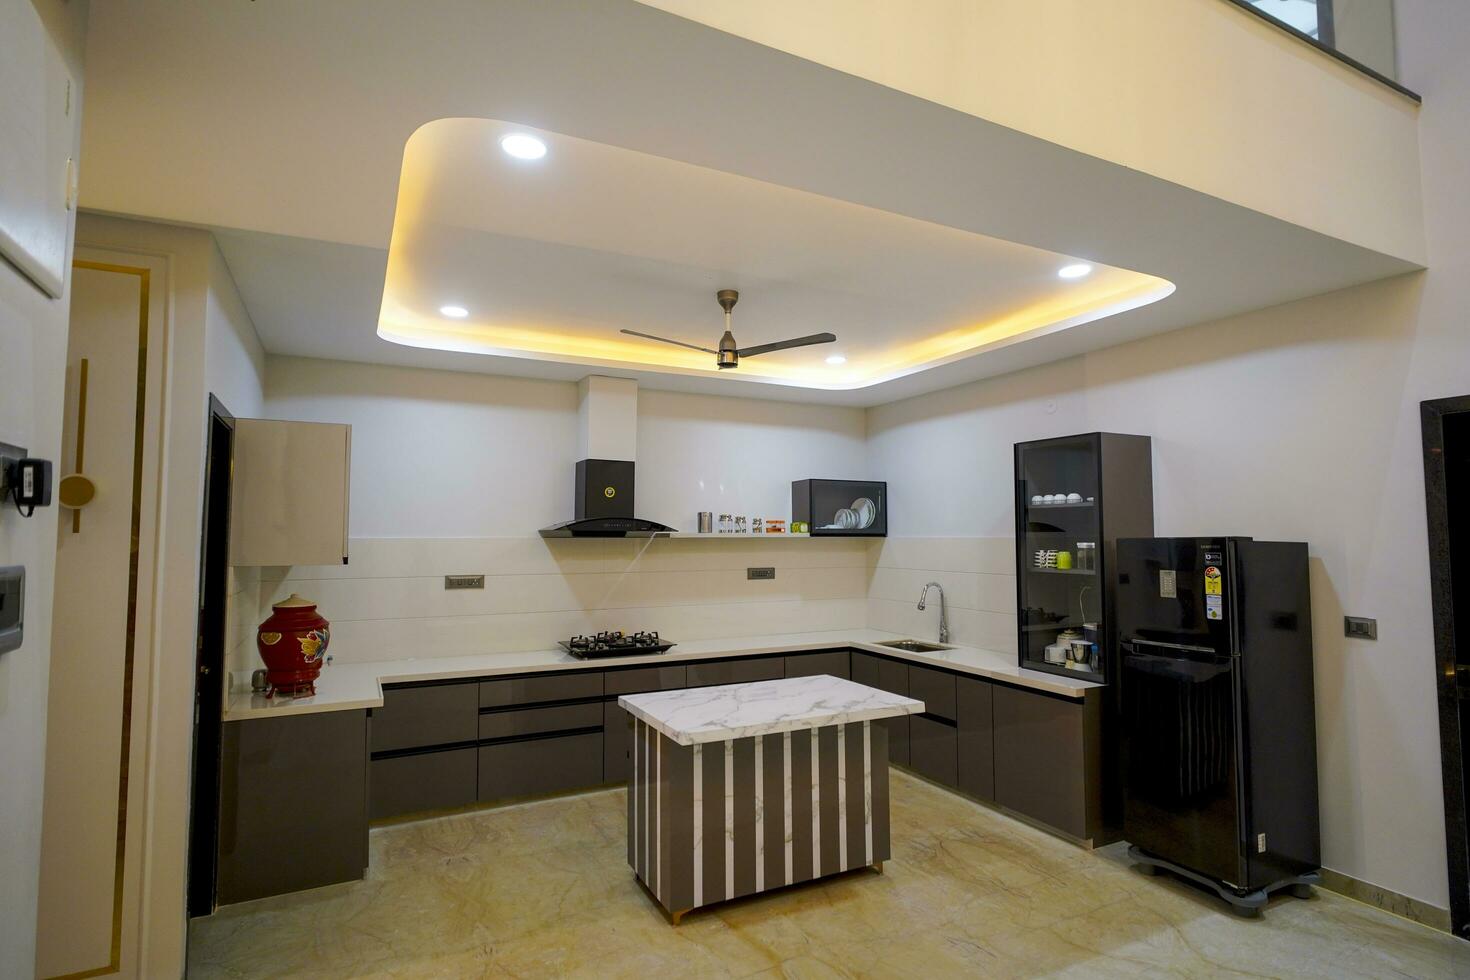 Elegance kitchen, spotlights on the ceiling, kitchen of the luxury house photo